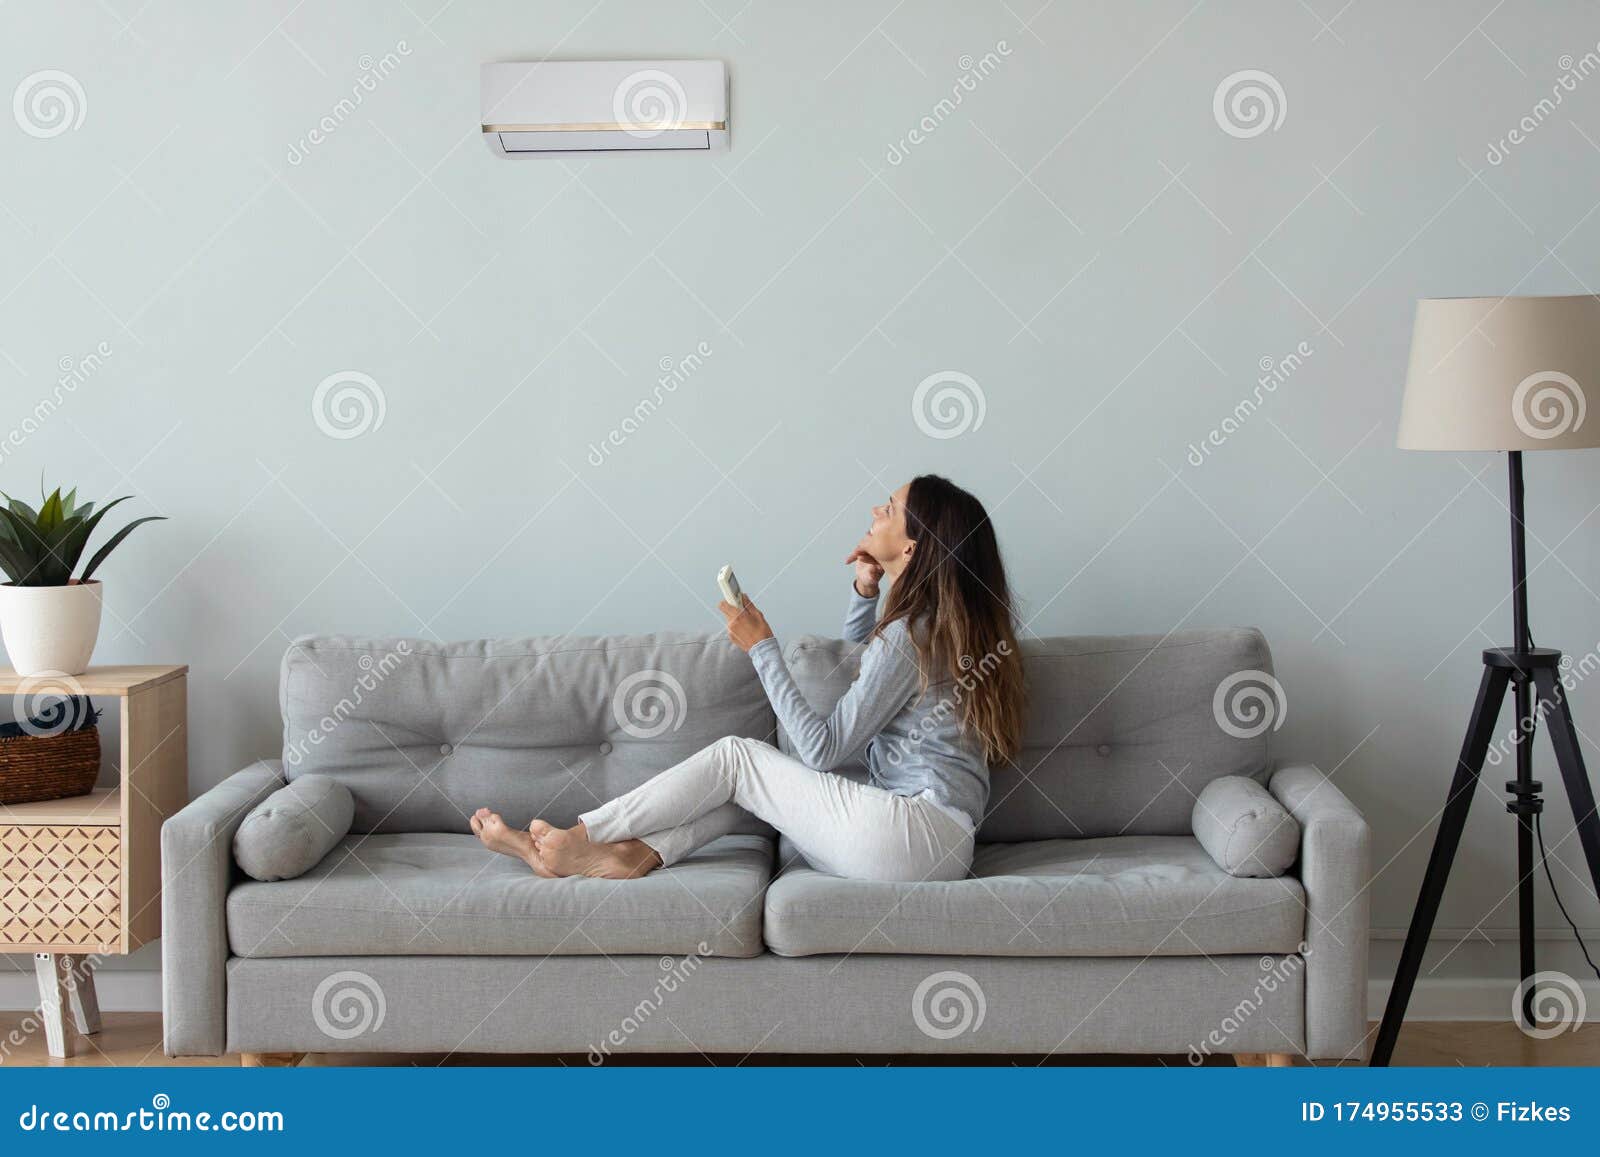 young woman turn on air conditioner in living room